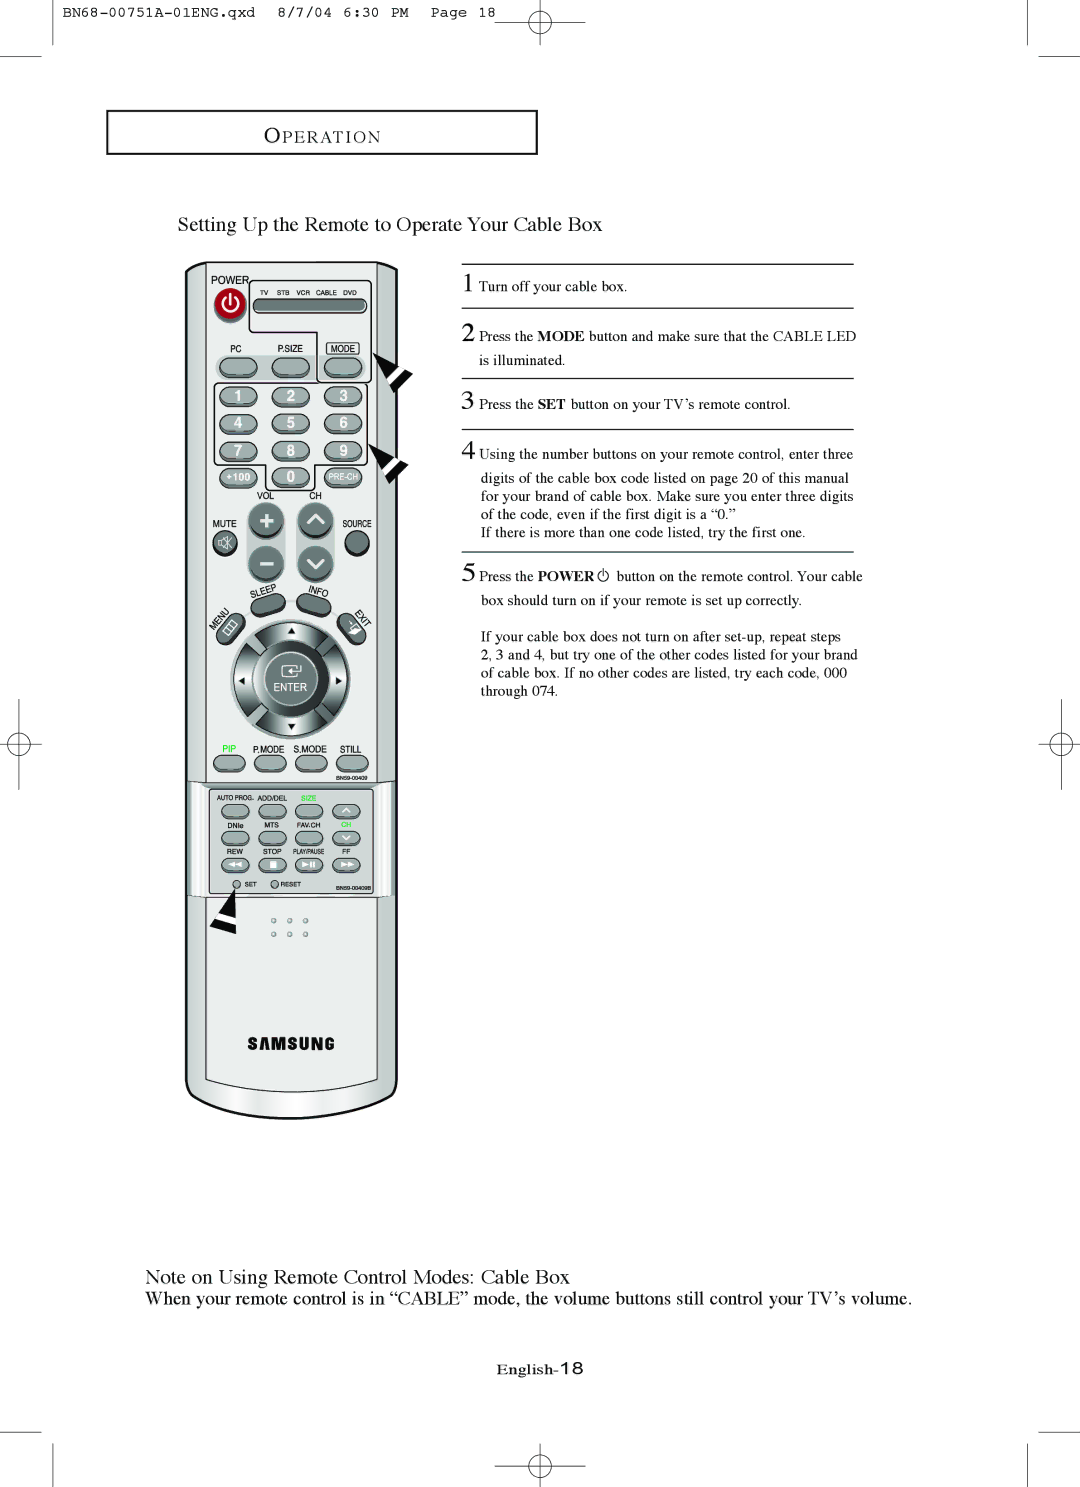 Samsung LN-P327W, LN-P267W manual Setting Up the Remote to Operate Your Cable Box 